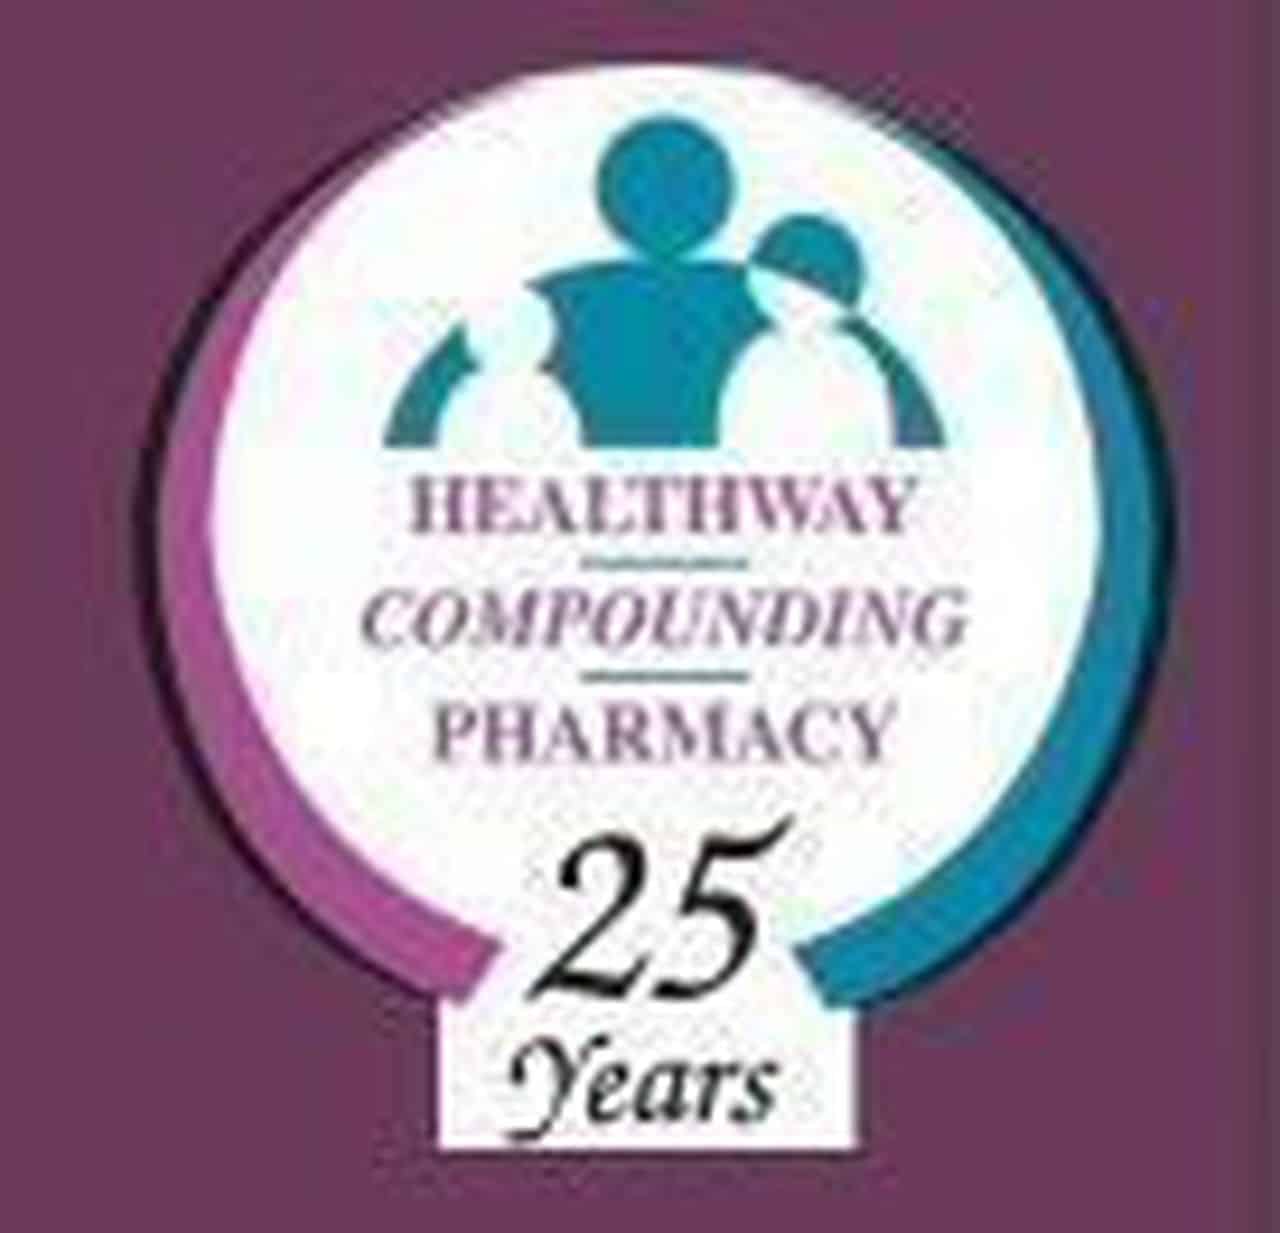 Healthway Pharmacy adds staff to Saginaw Township, St. Charles ...